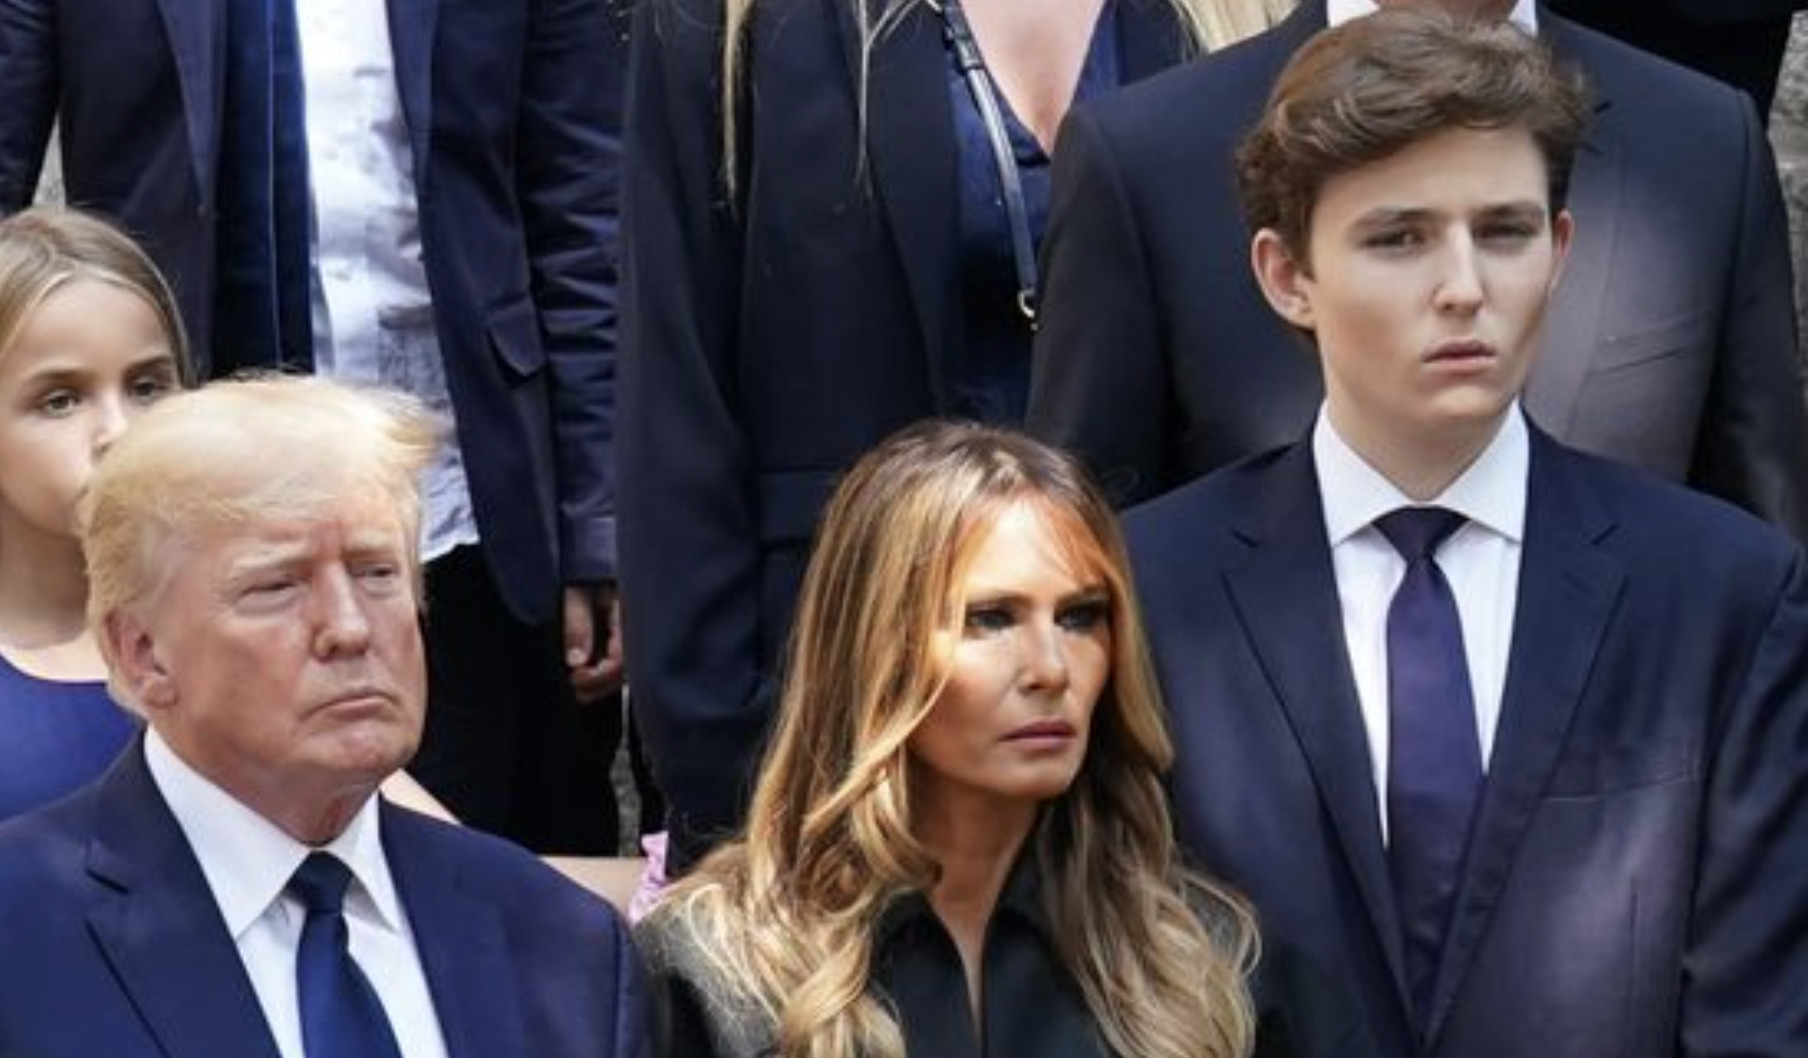 Trump Doesn't 'Get Along' With Son Barron and Is Pathologically Jealous